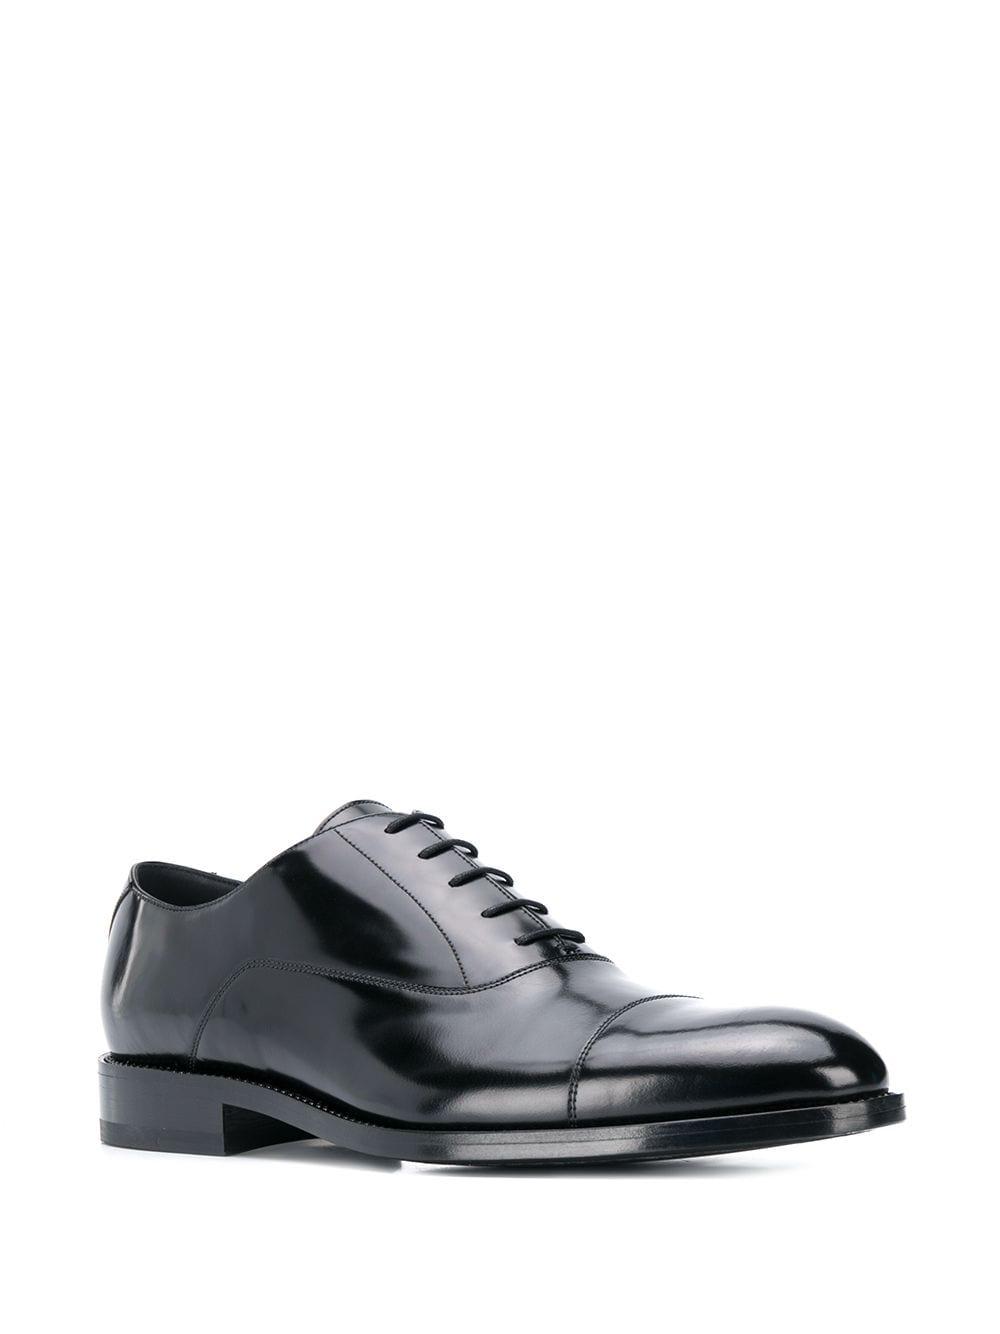 Jimmy Choo Leather Falcon Lace-up Shoes in Black for Men - Lyst